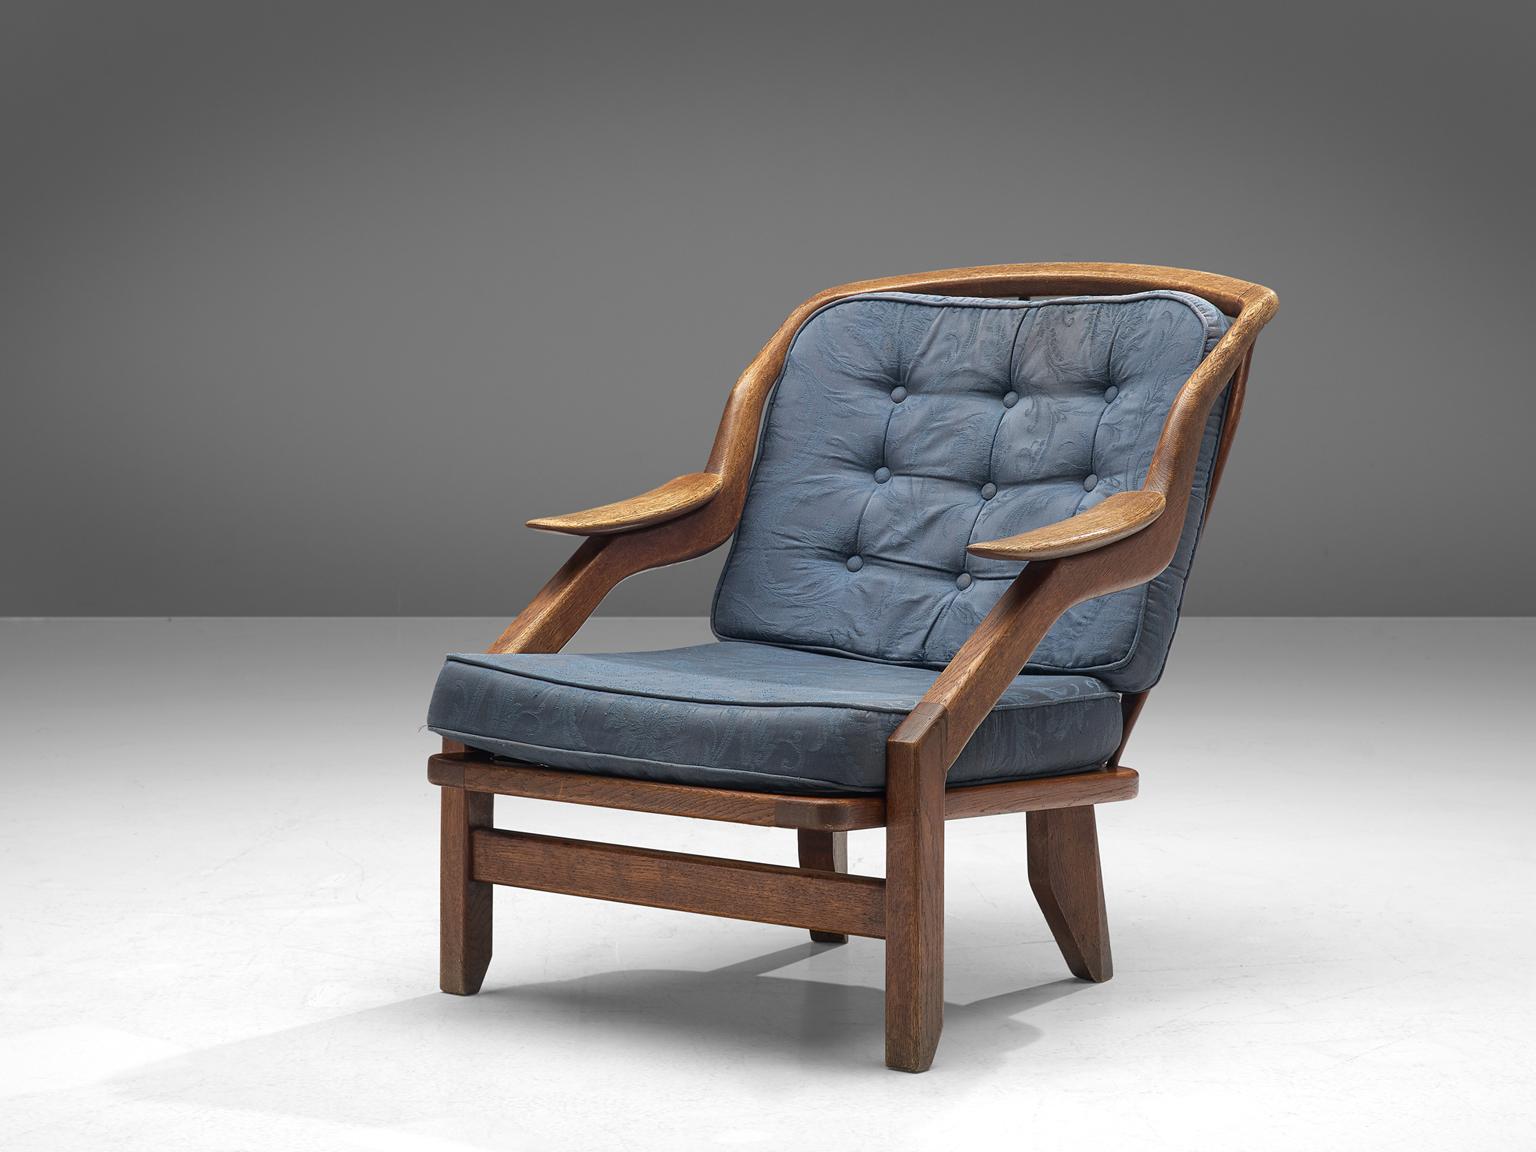 Guillerme and Chambron, lounge chair, blue fabric and oak, France, 1950s. 

This French designer duo is known for their extreme high quality solid oak furniture, from which this lounge chair is another great example. The chair has a very